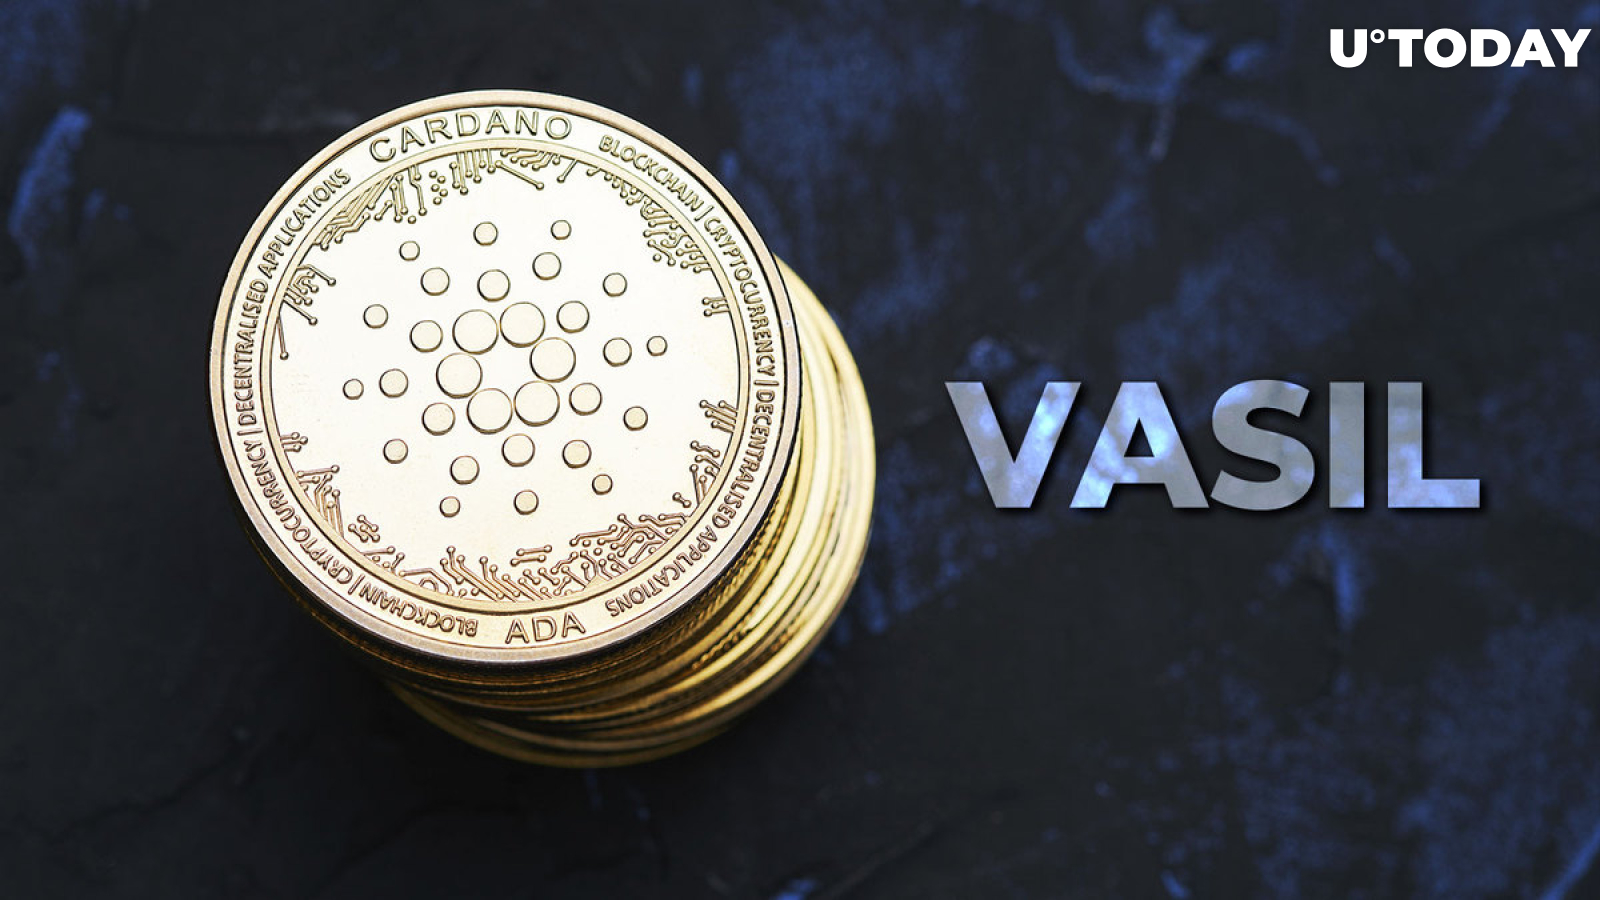 Cardano's First Node Release After Vasil Gains Traction, Here's What to Know